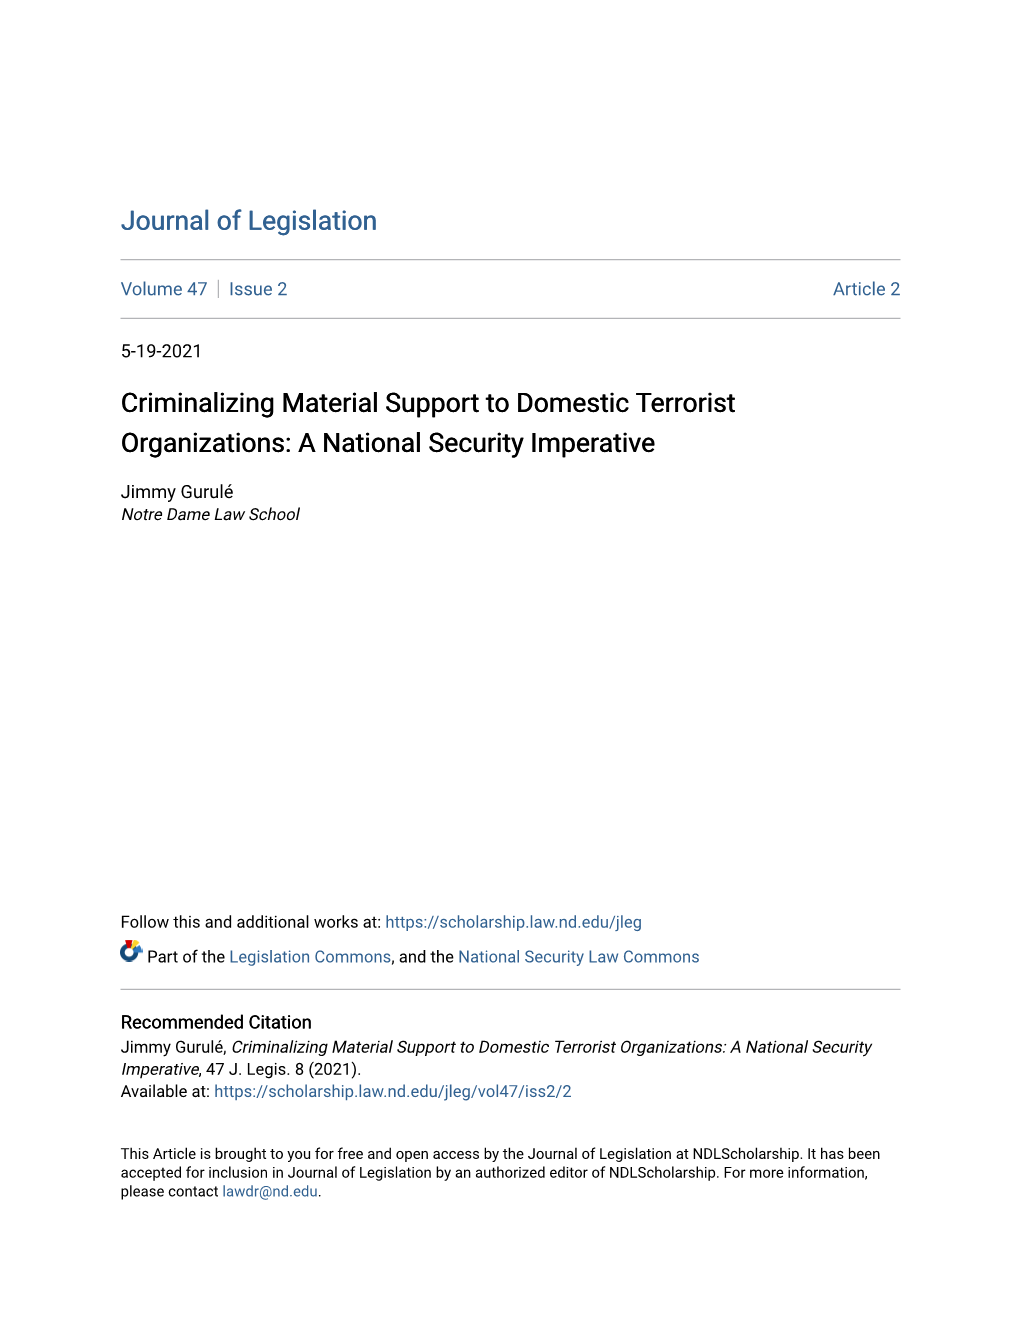 Criminalizing Material Support to Domestic Terrorist Organizations: a National Security Imperative